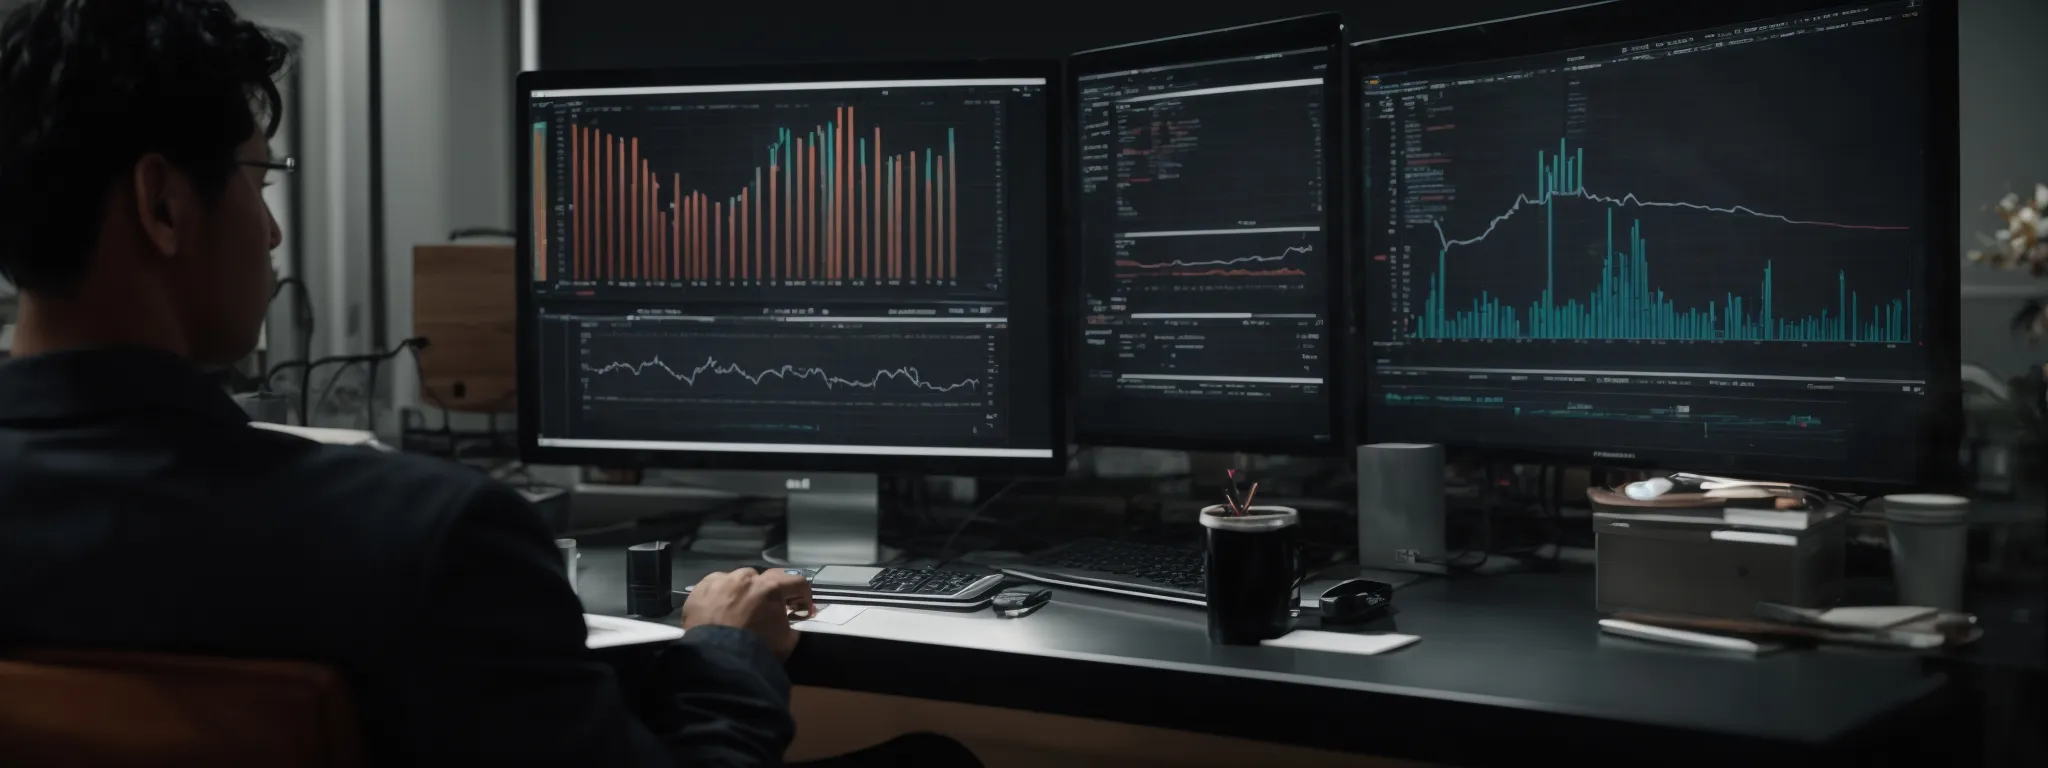 a marketer analyzes data on a computer screen displaying multiple graphs and trend lines.